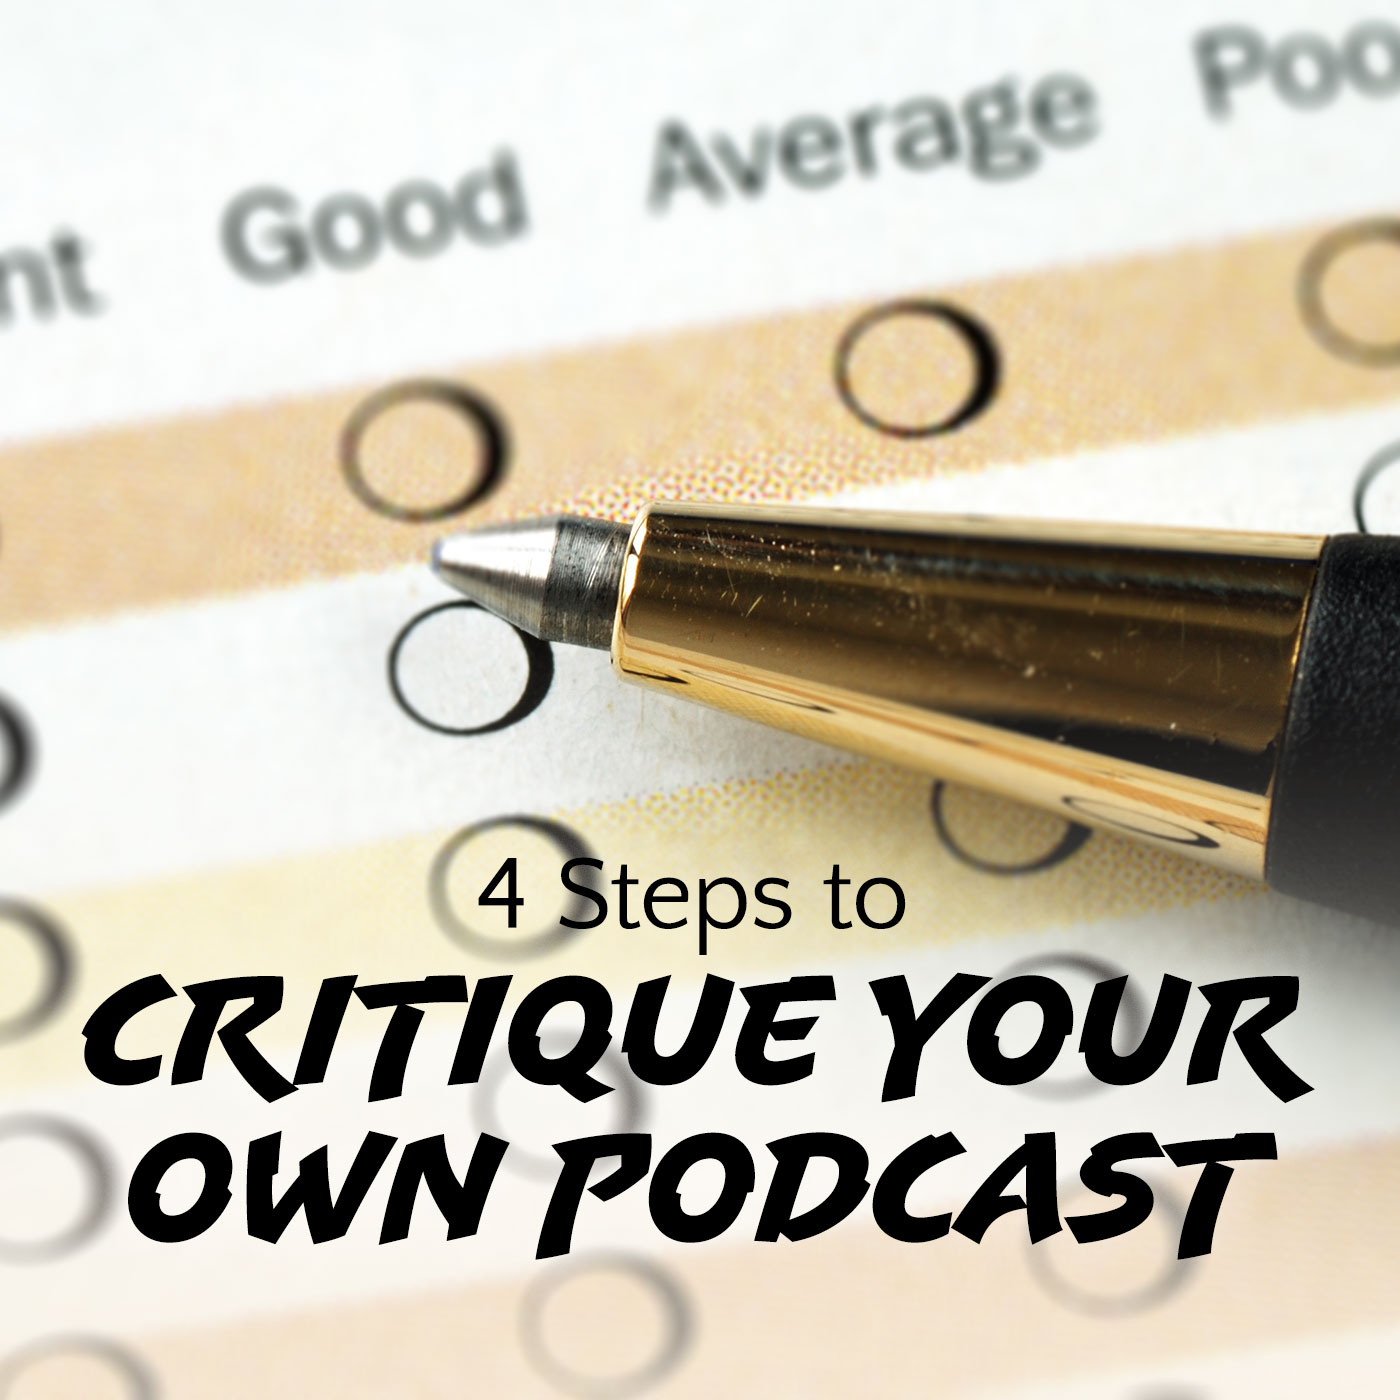 4 Steps to Critique Your Own Podcast